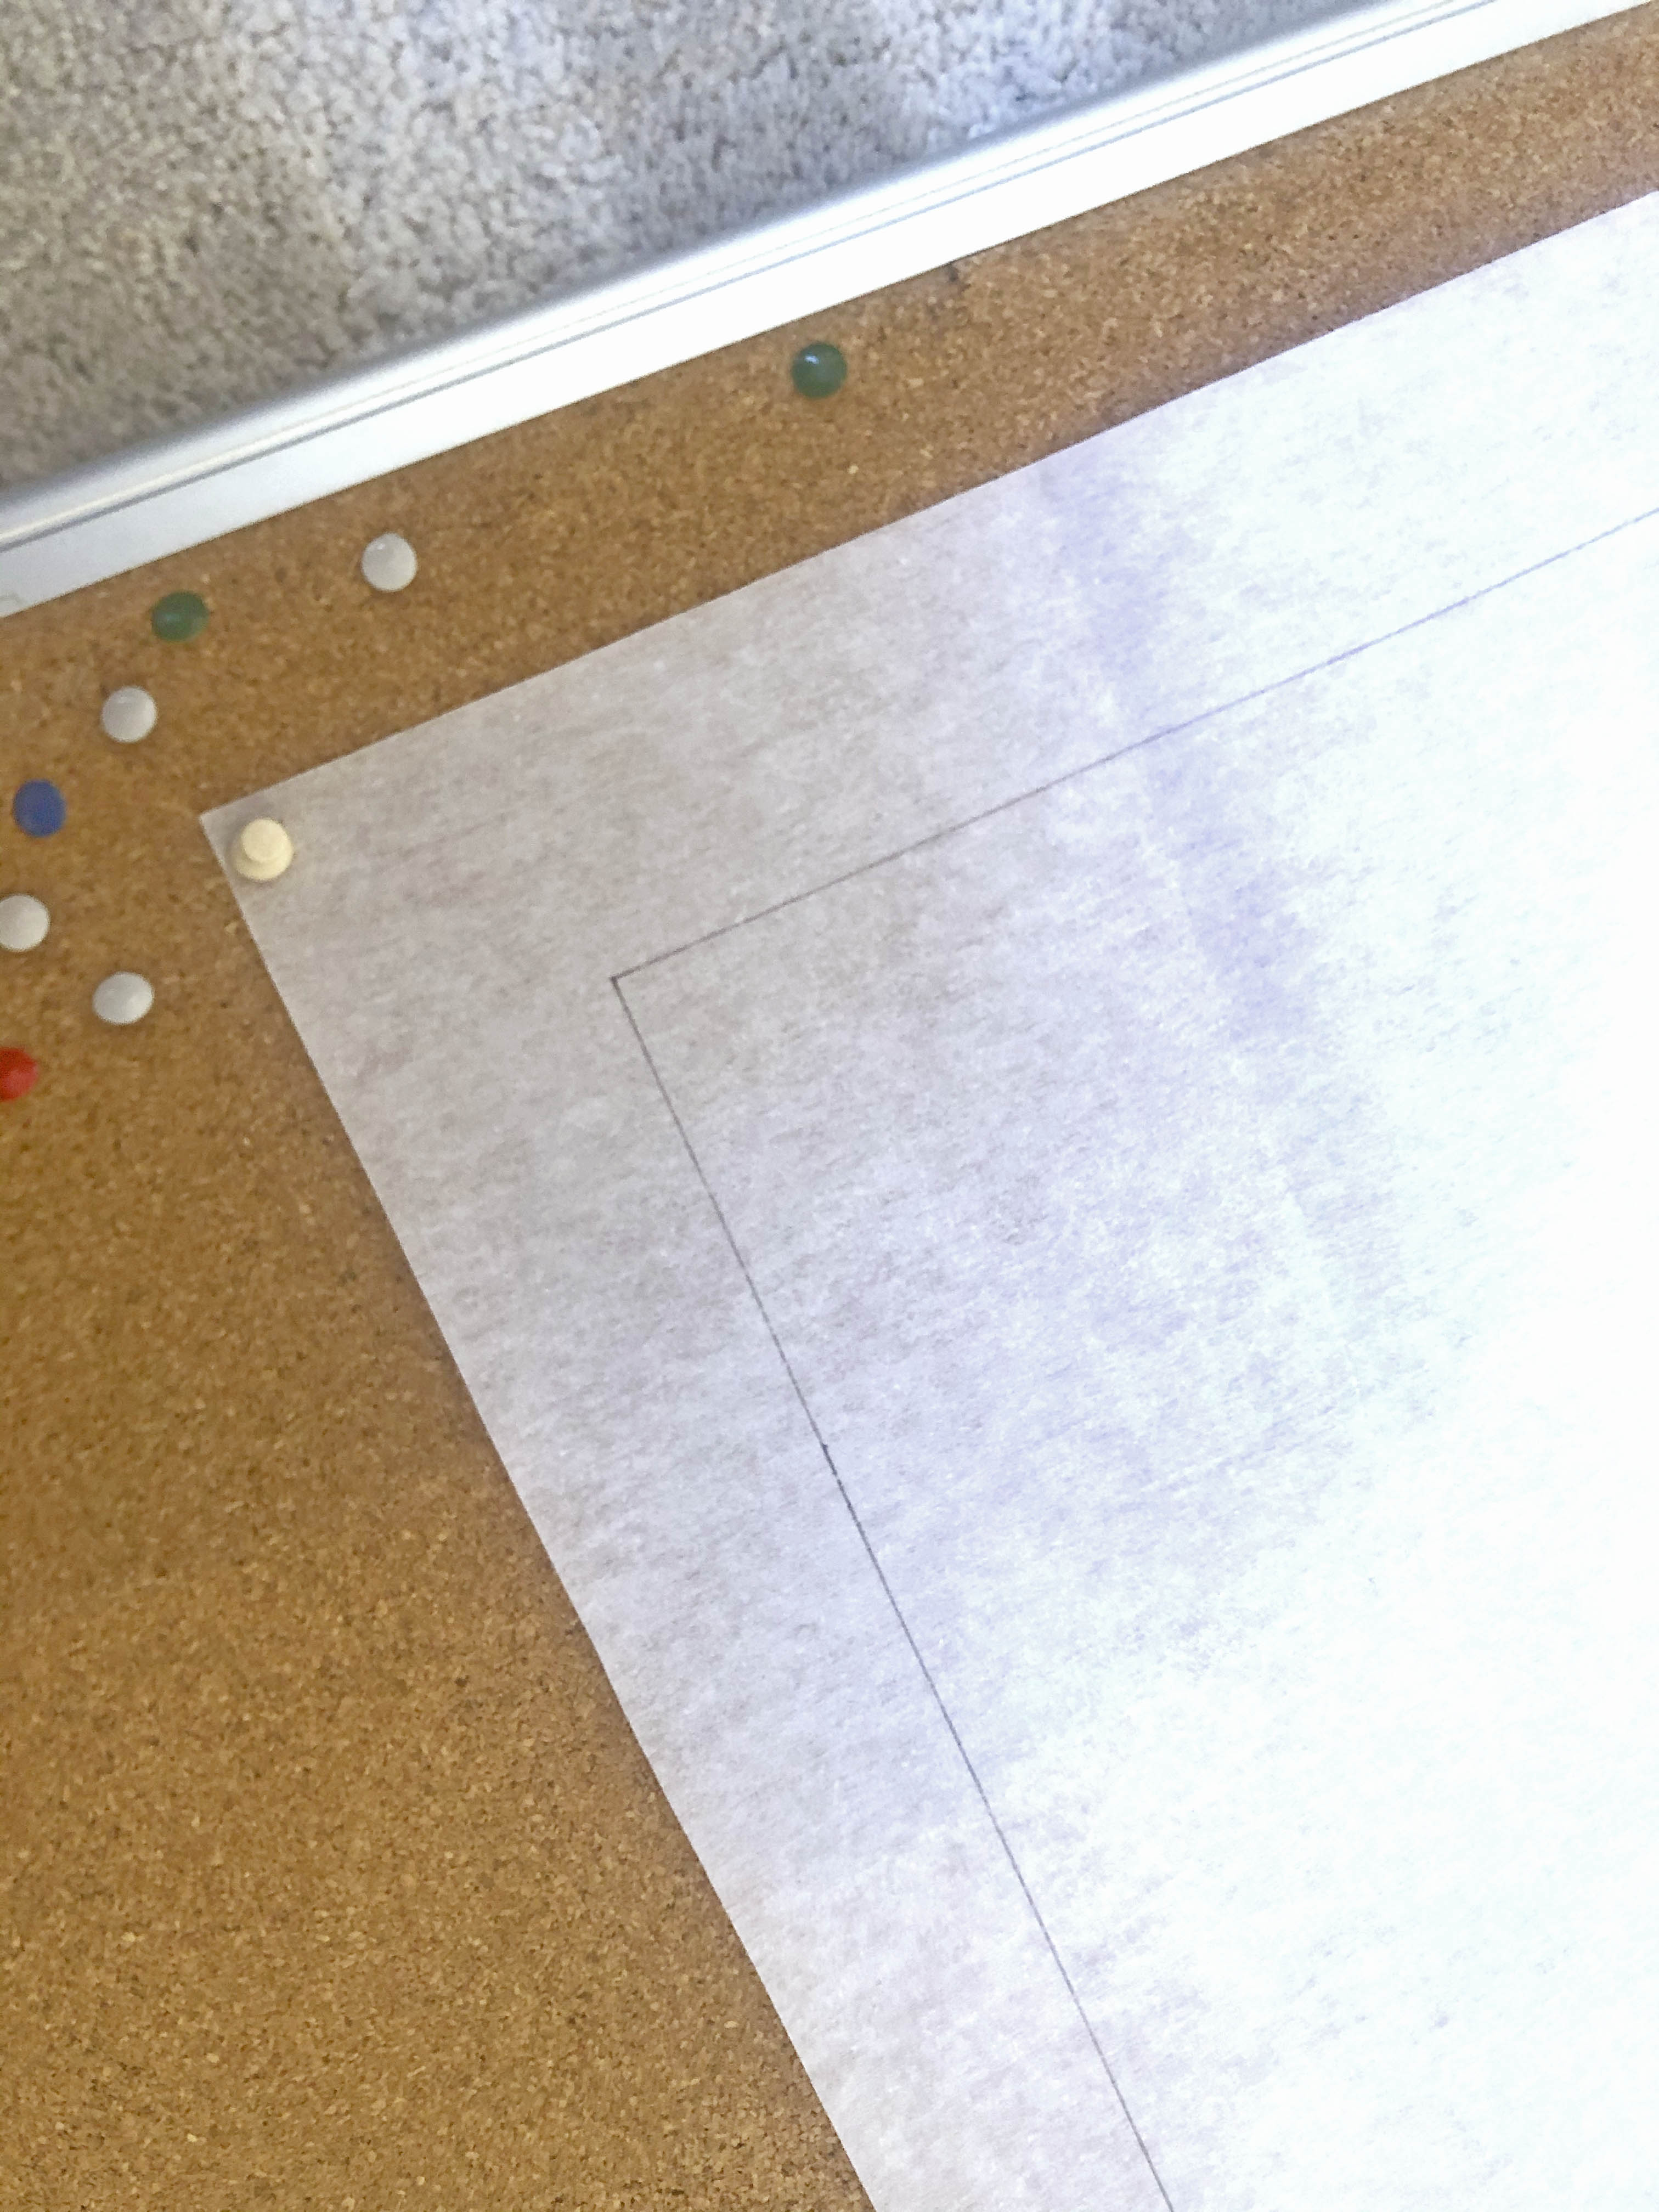 Iron on interfacing pinned to a cork board for crafting